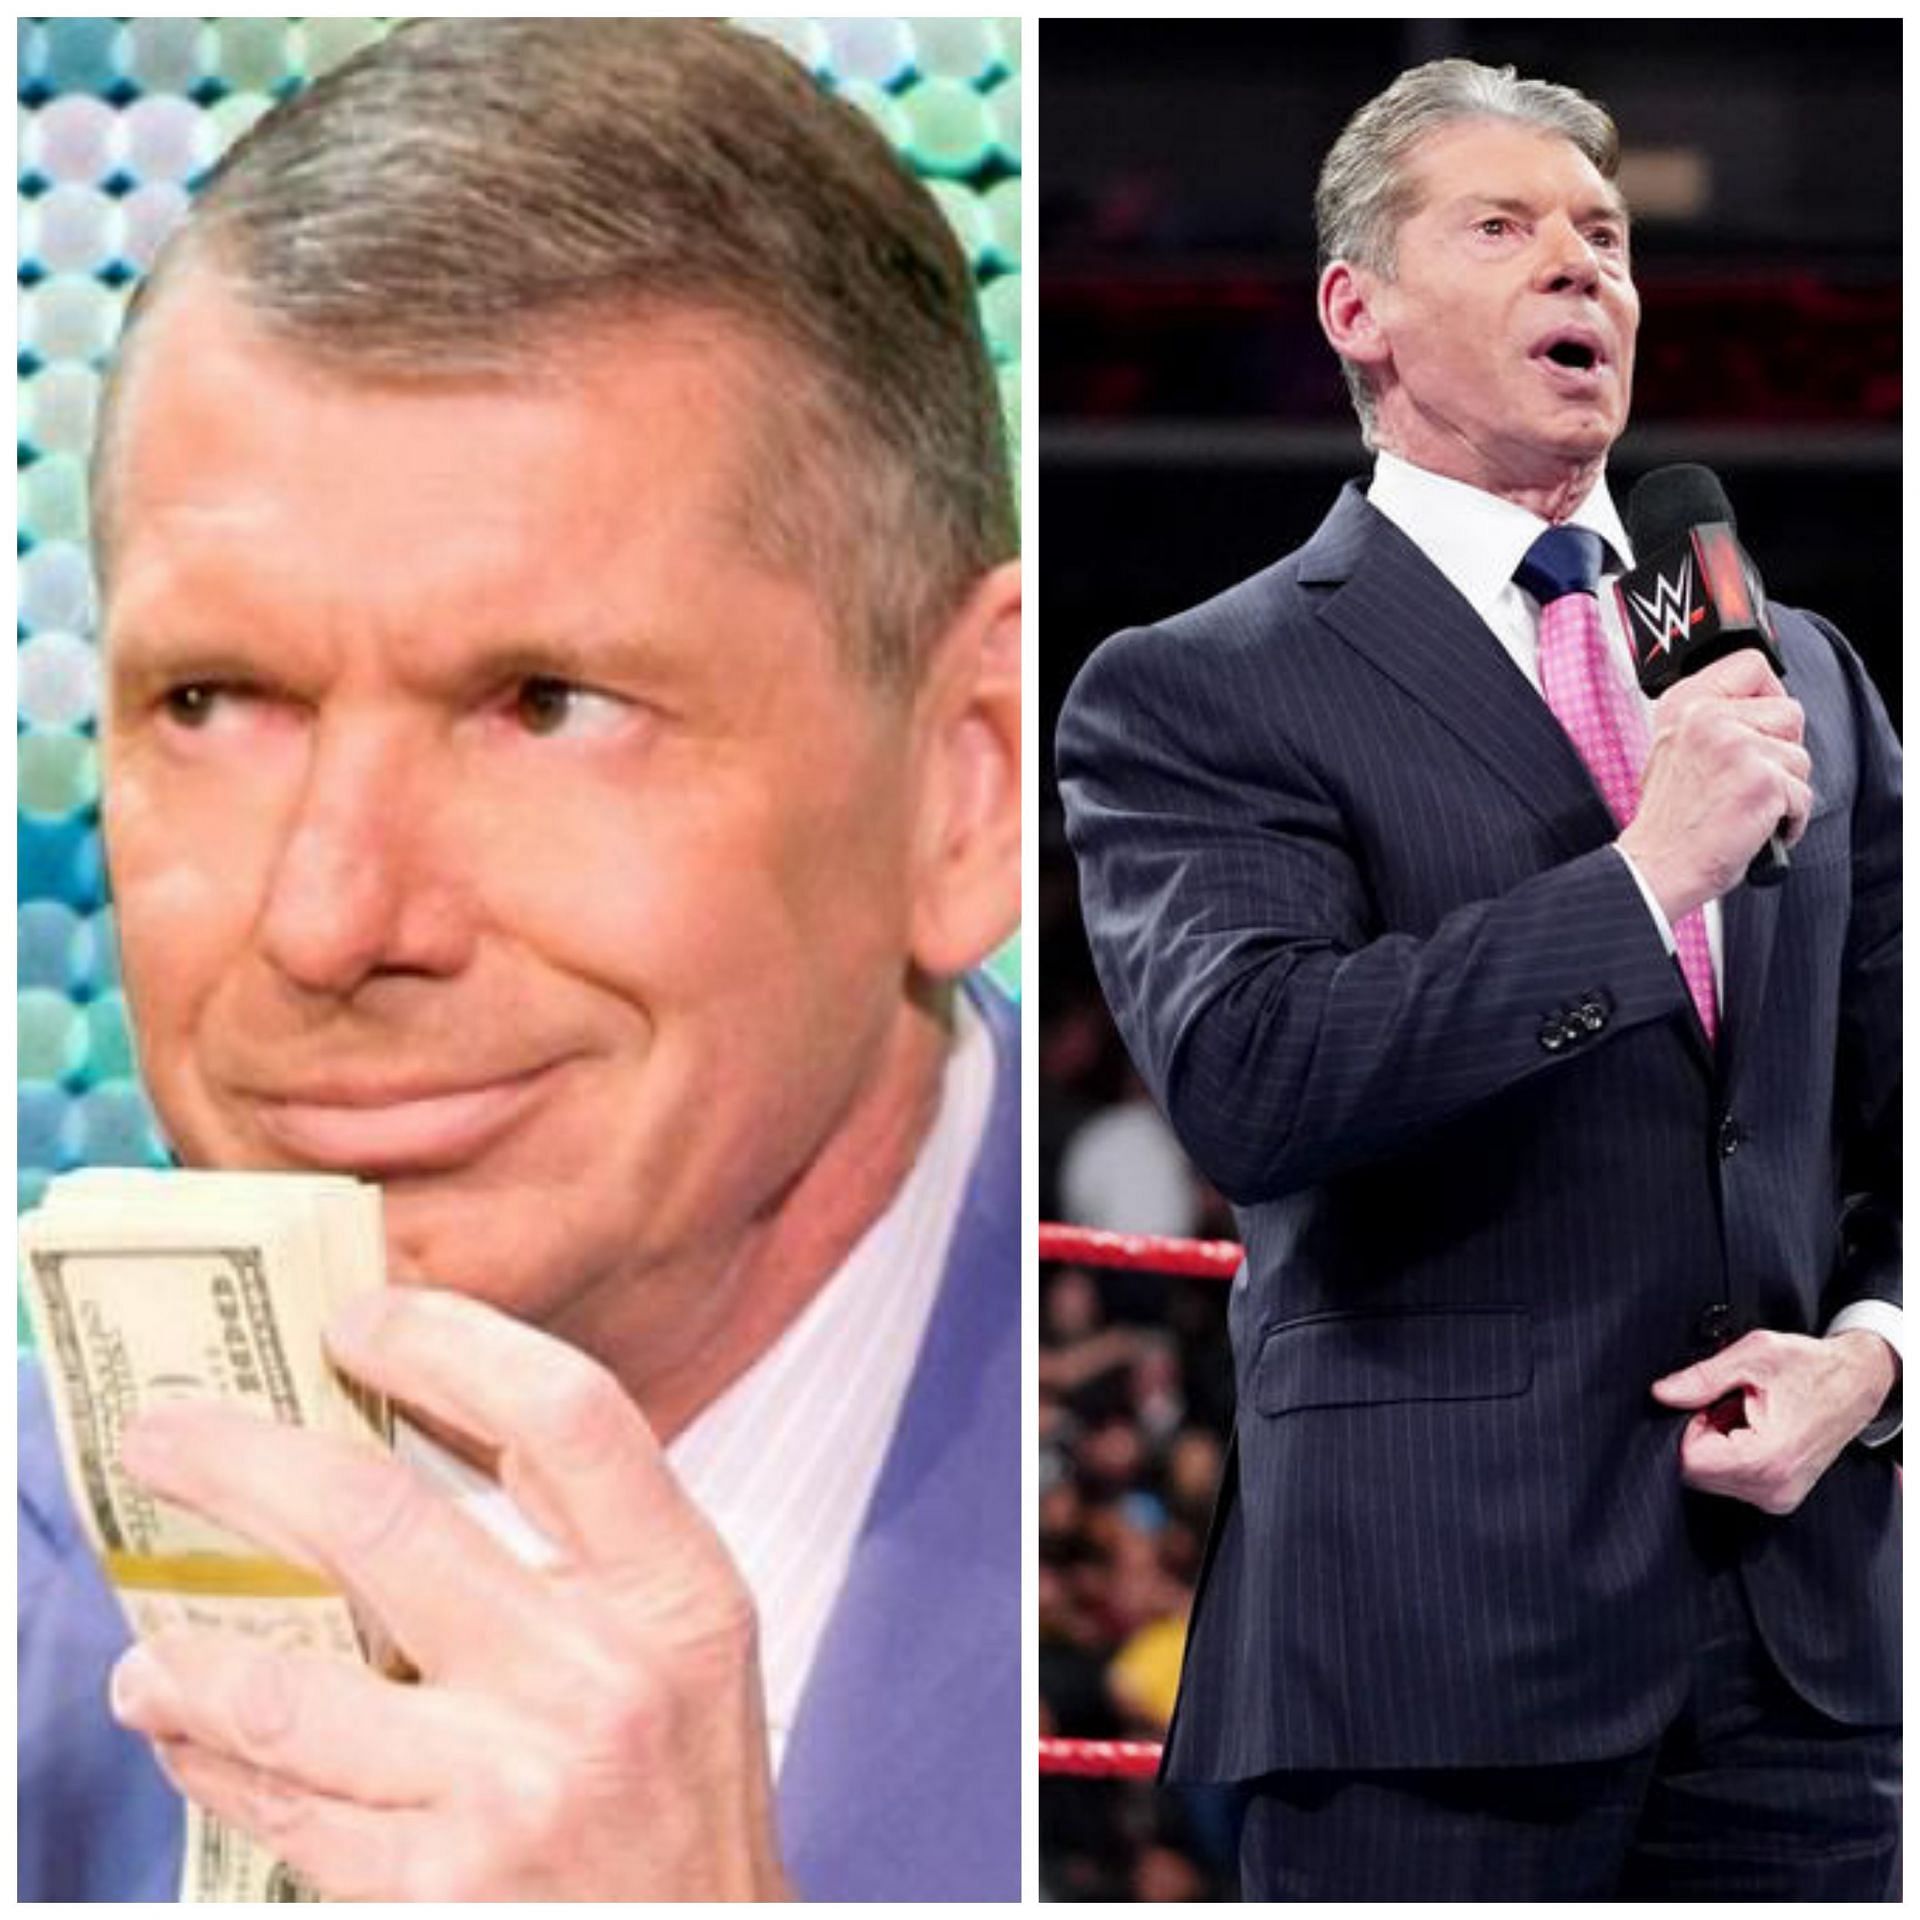 Mr. McMahon is no longer the WWE Chairman